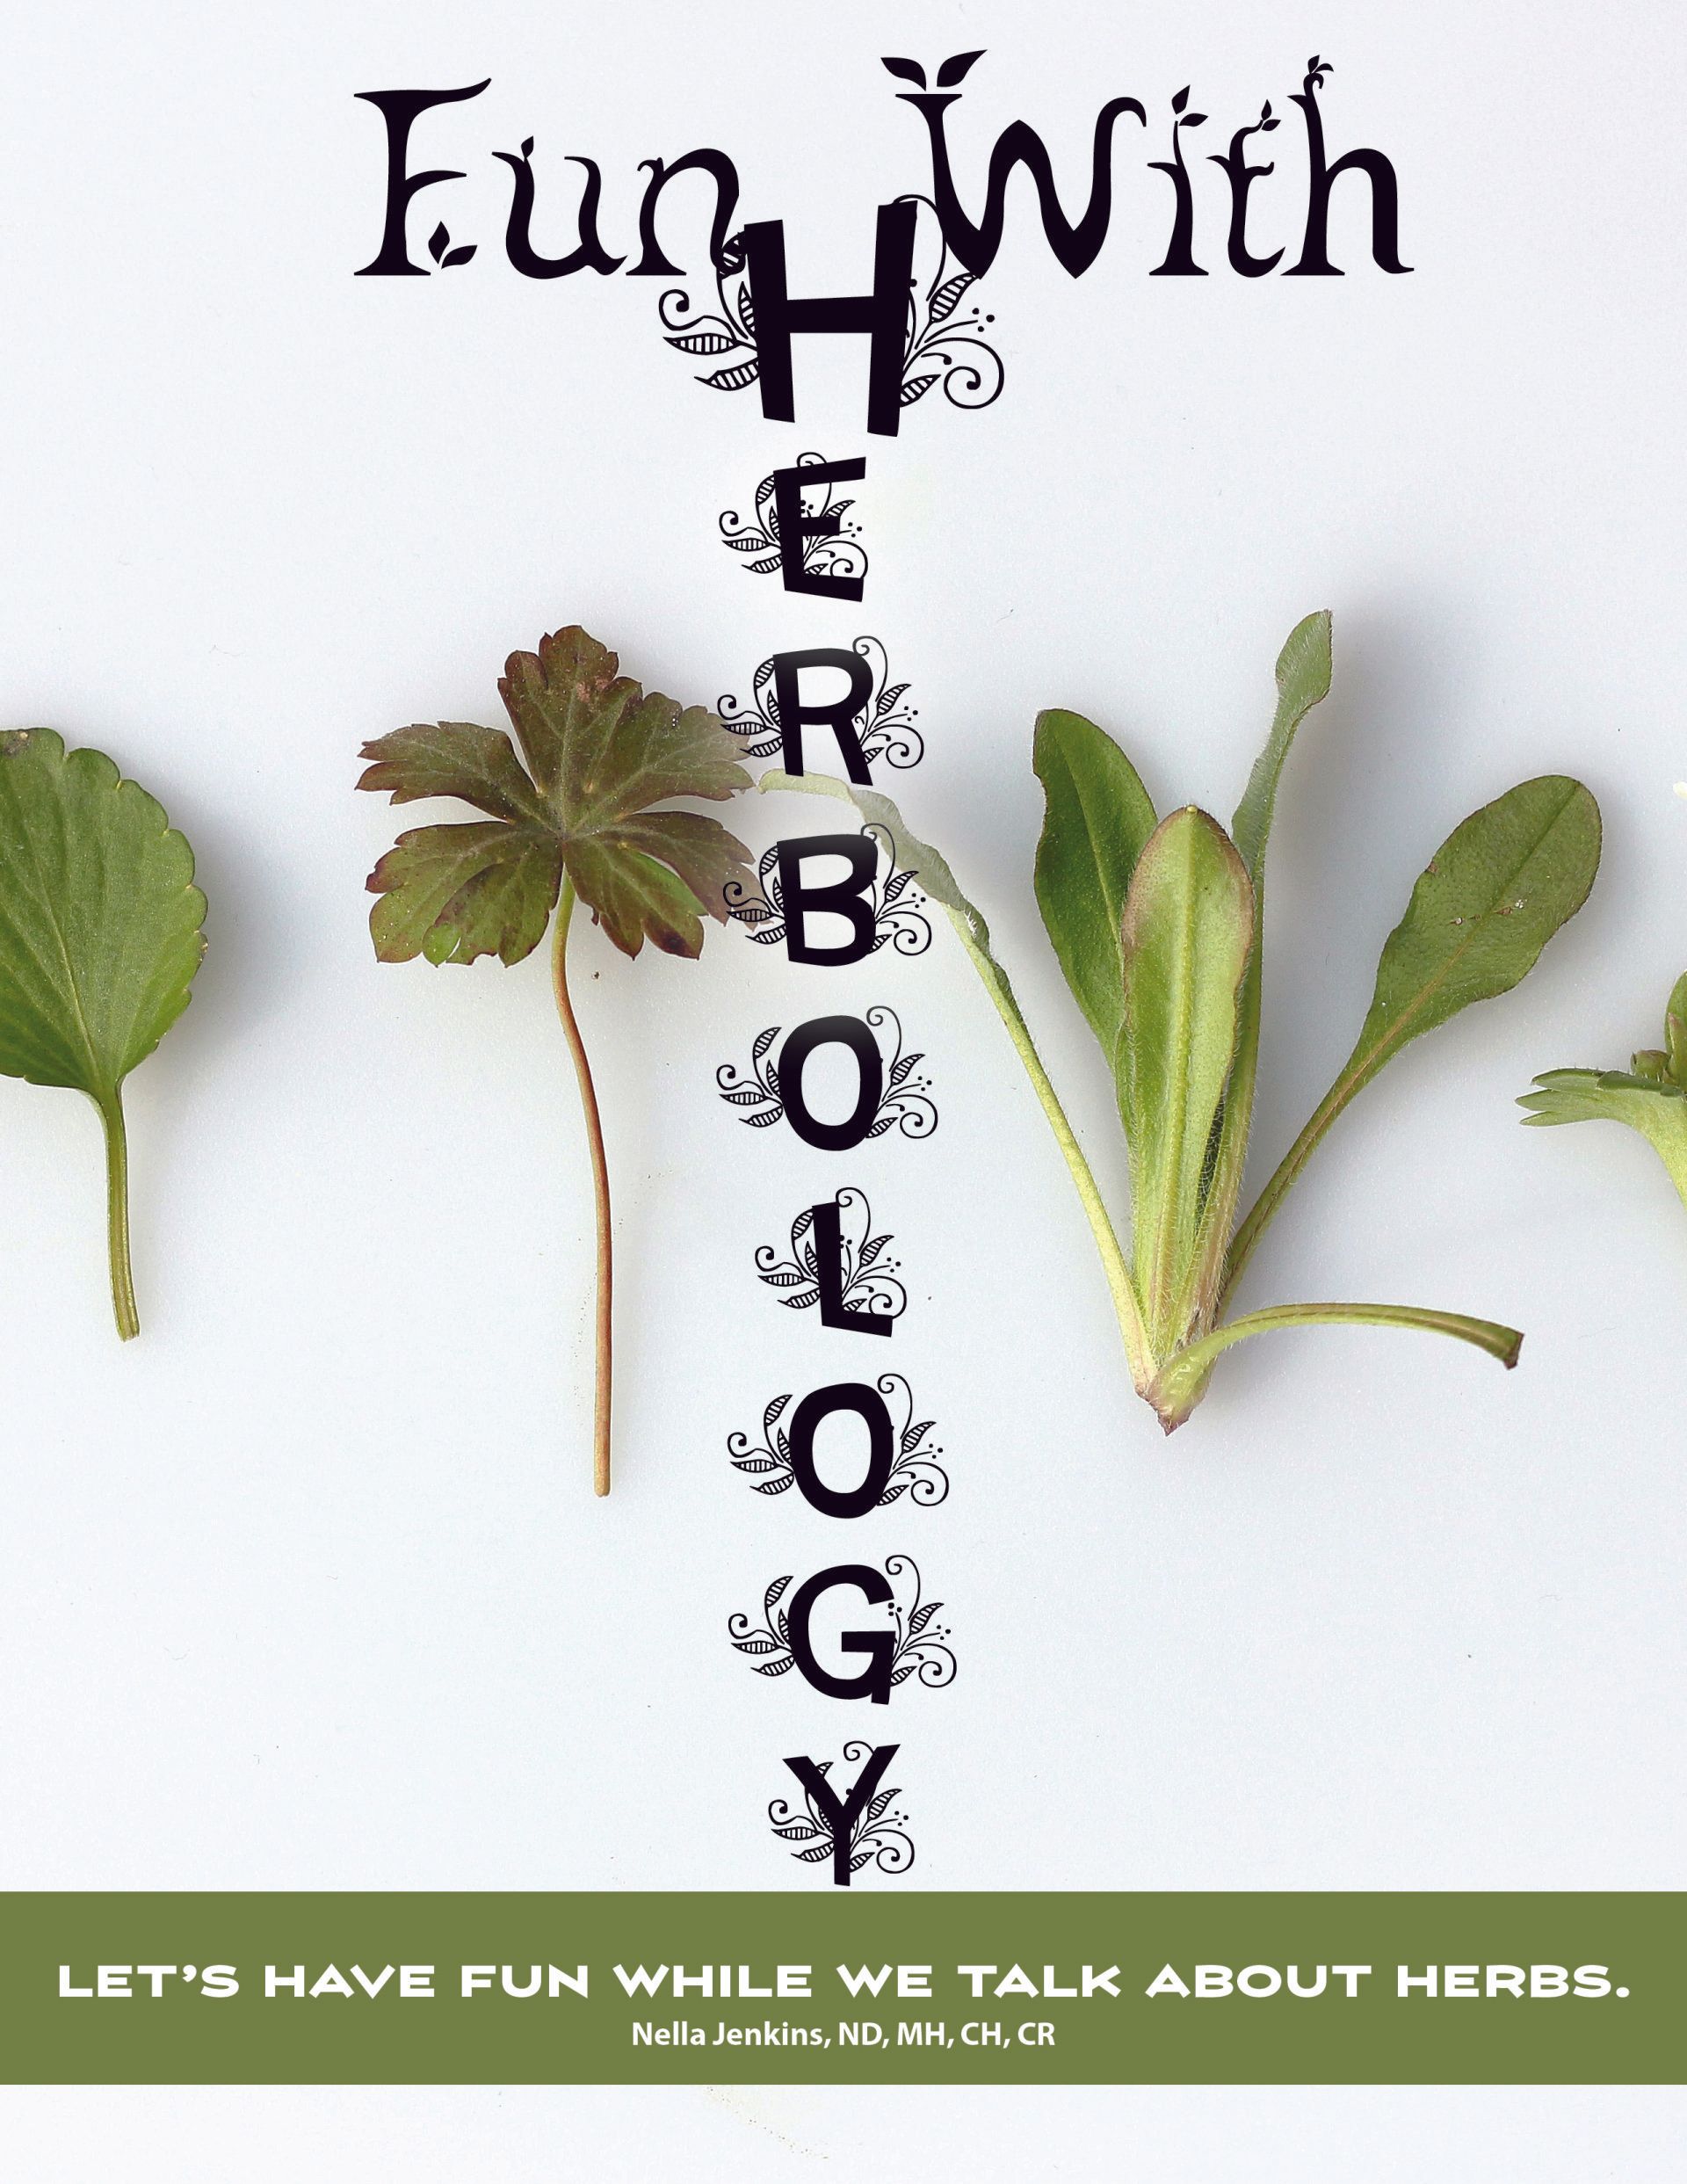 book for studying herbology; certified herbalist